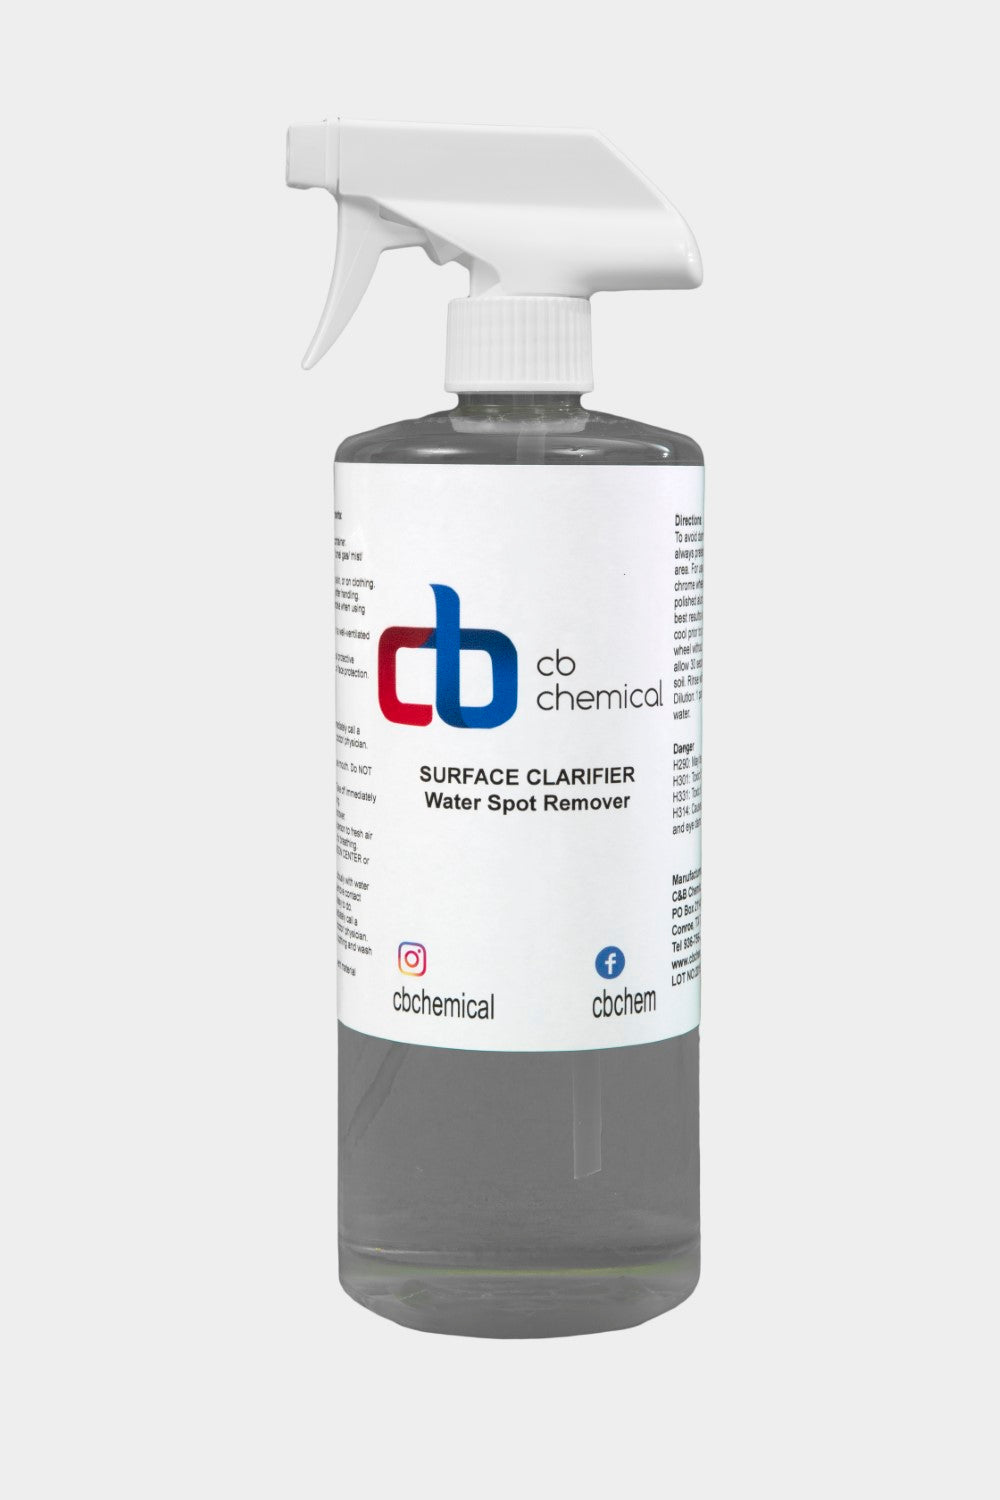 Surface Clarifier / Water Spot Remover - C & B Chemical, Inc